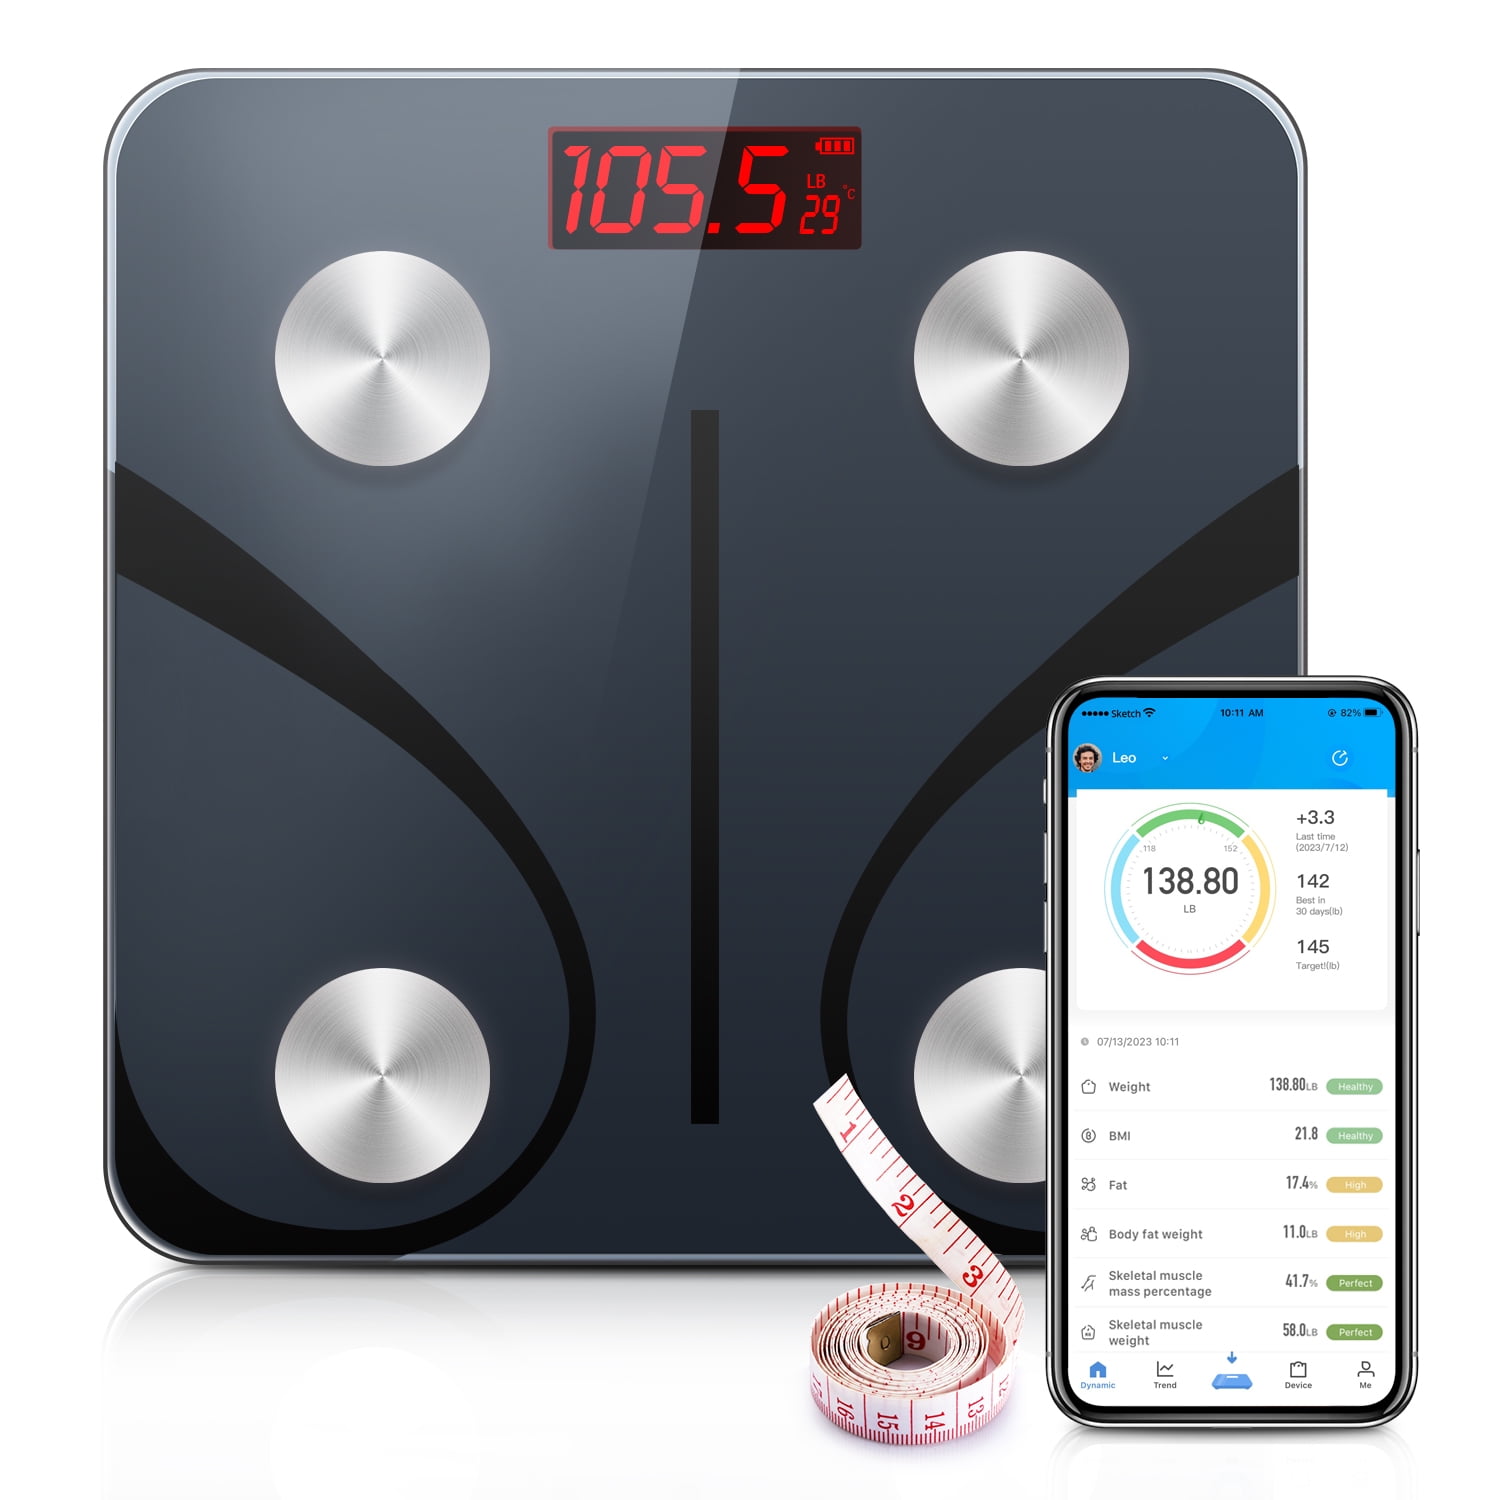 Toyuugo Bluetooth Body Fat Bathroom Scale,Scales Digital Weight,Weight  Scale,Body Composition Analyzer Wireless BMI with Smart Phone App  Scales,396